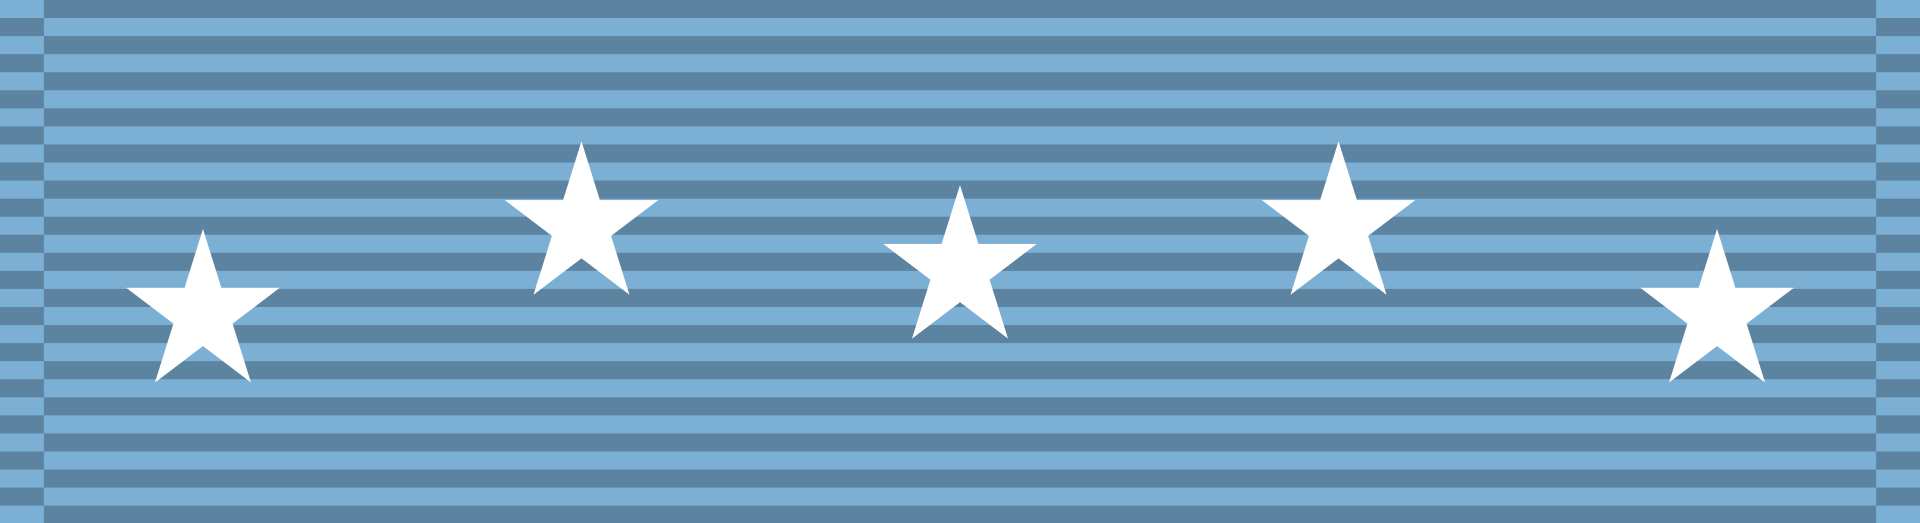 1920px-Medal_of_Honor_ribbon.svg.png